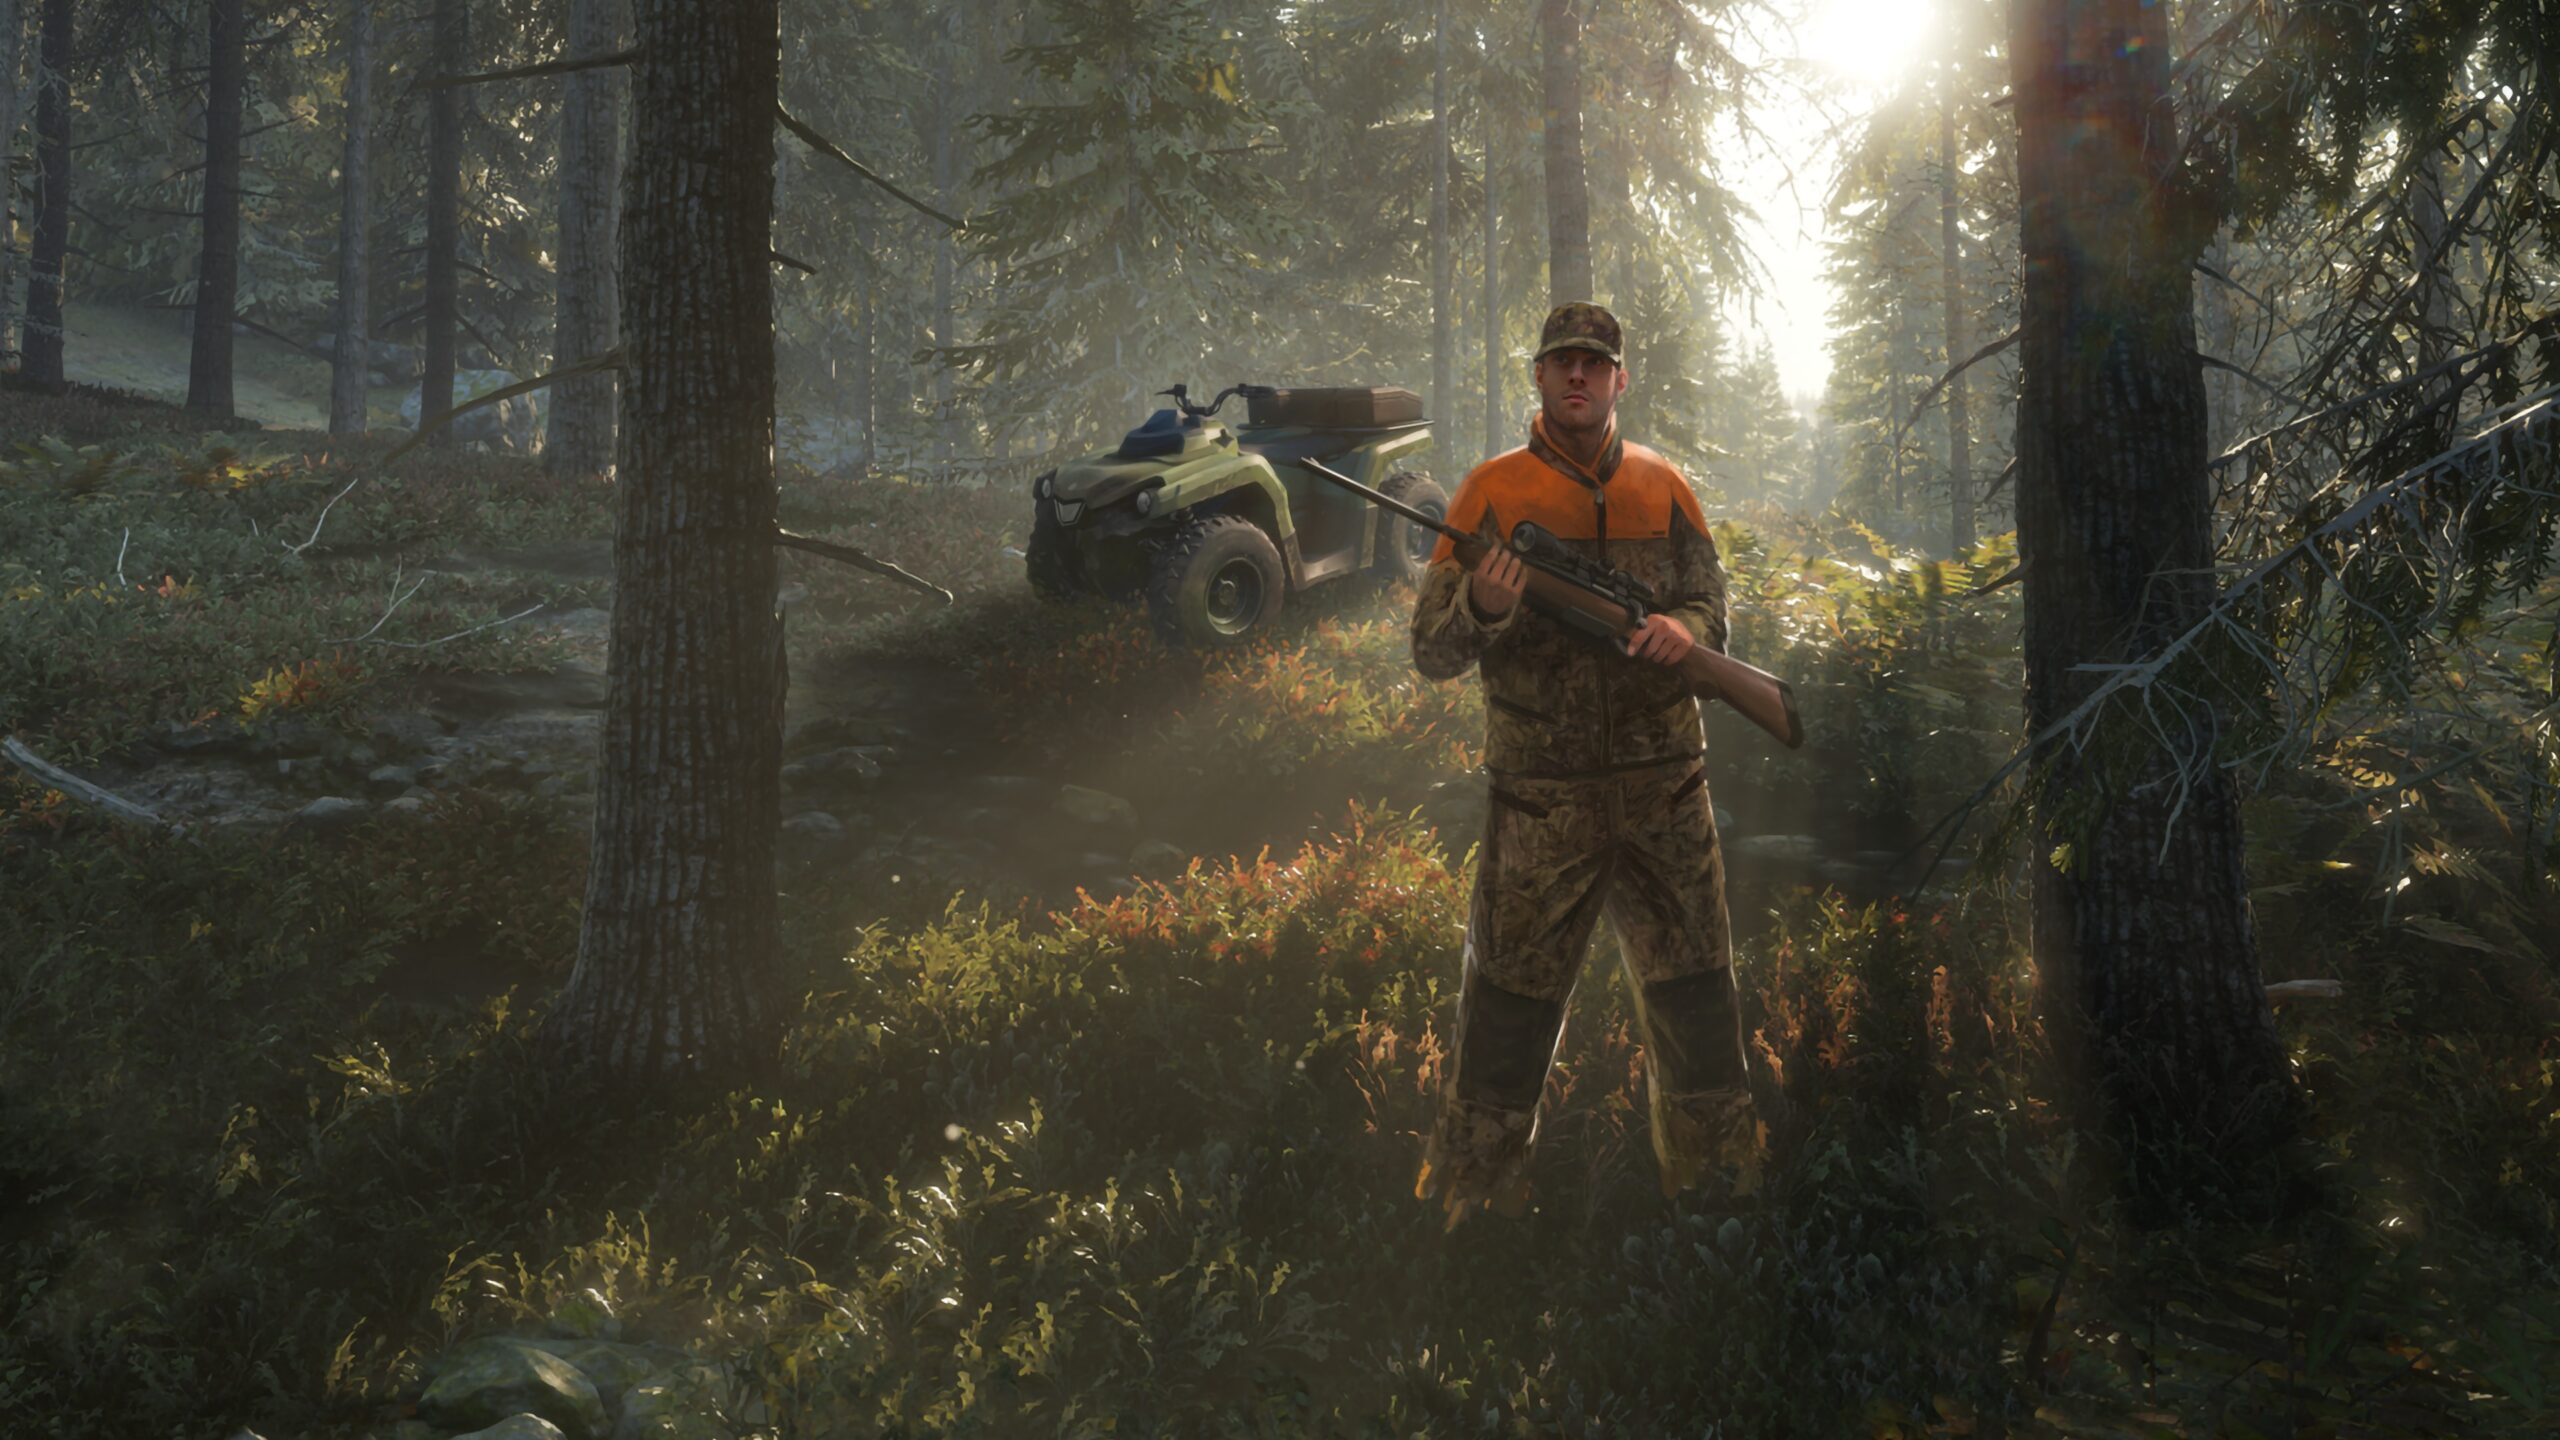 Call of the wild games. Игра the Hunter Call of the Wild. THEHUNTER: Call of the Wild лого. The Hunter Call of the Wild логотип. The Hunter Call of the Wild последняя версия.